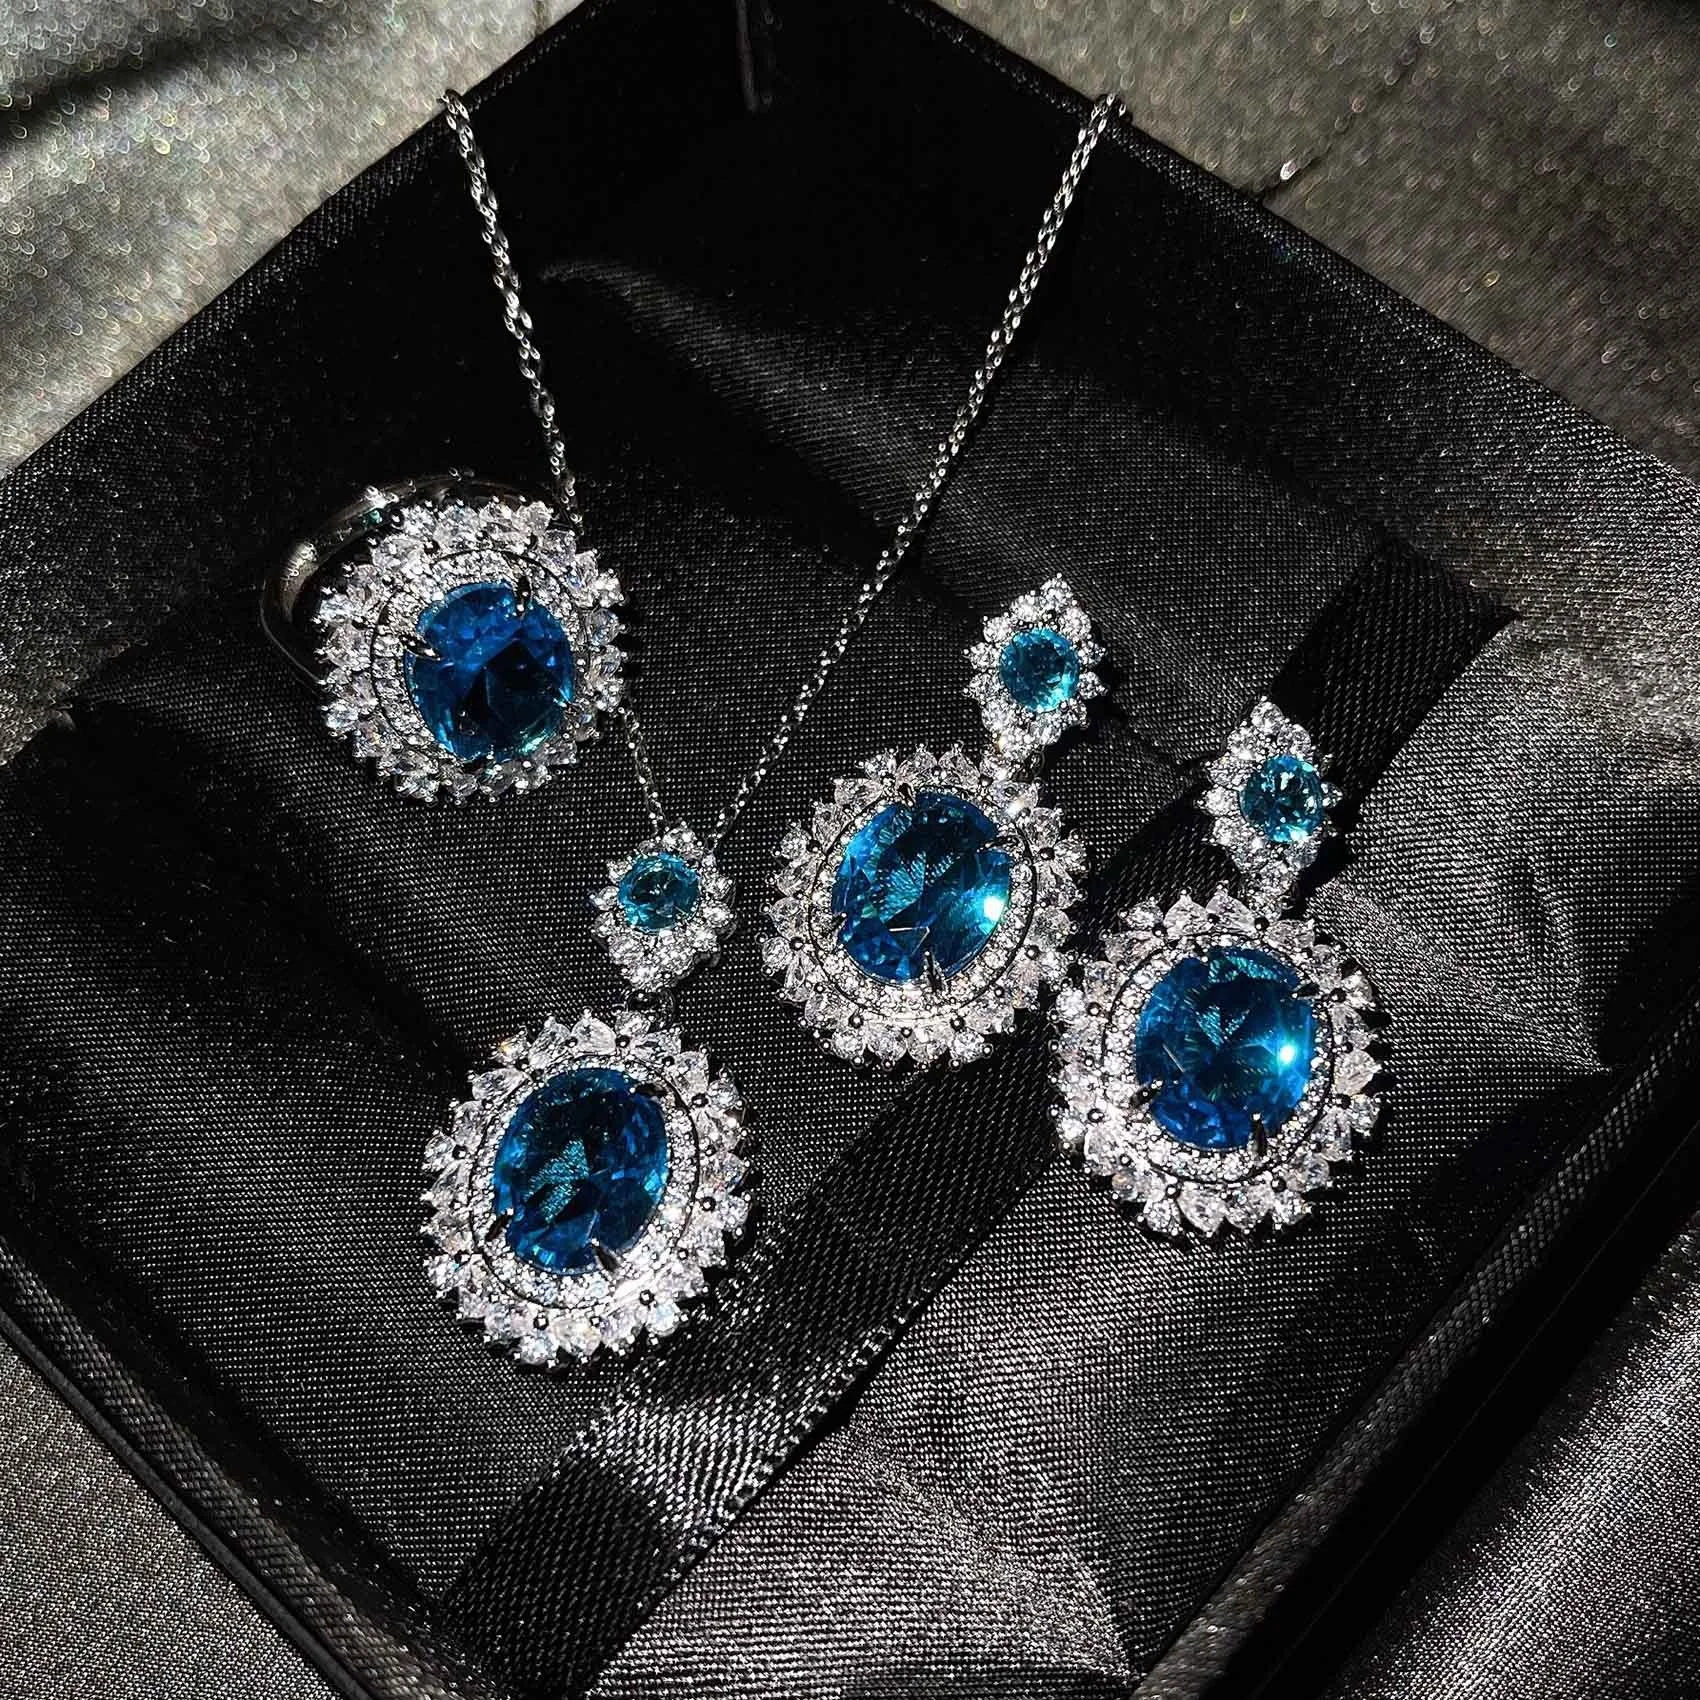 

Europe America Luxury Jewelry Set Inlay Oval Blue Cubic Zircon Dainty Necklace/Earrings/Eternity Wedding Ring For Women, Picture shows